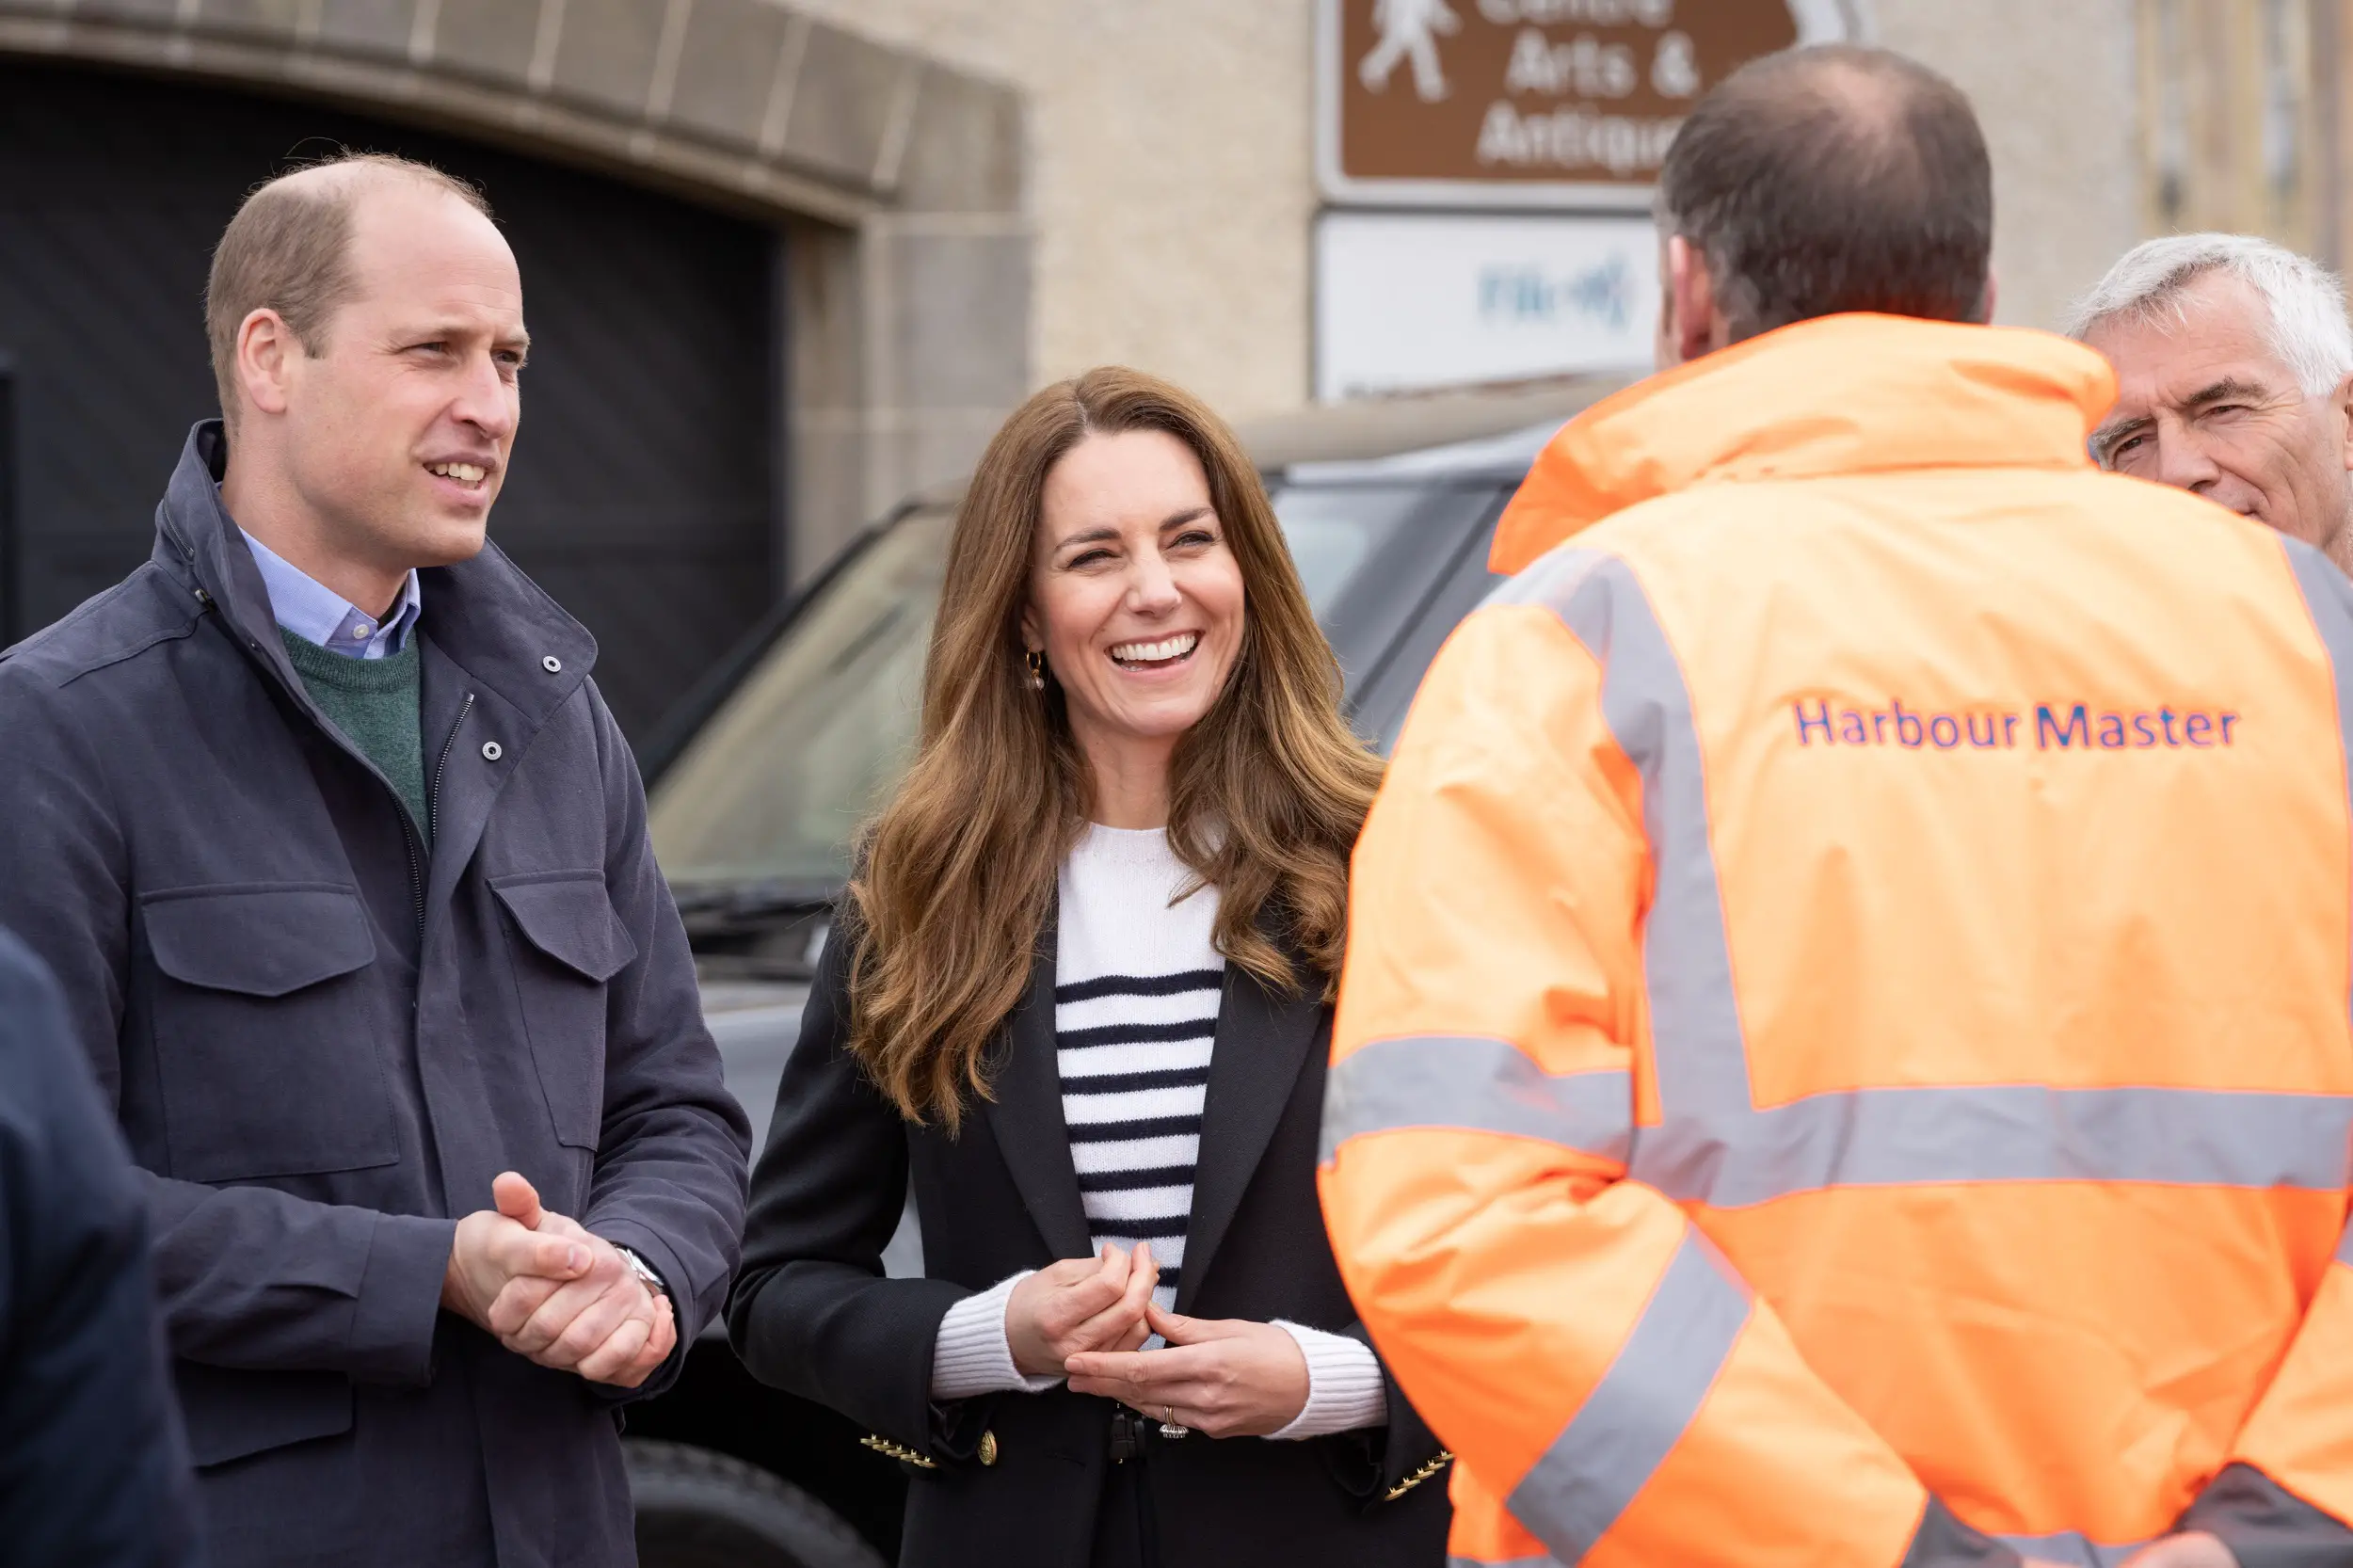 The Duke and Duchess of Cambridge had a Walk Down the Memory Lane at St Andrews